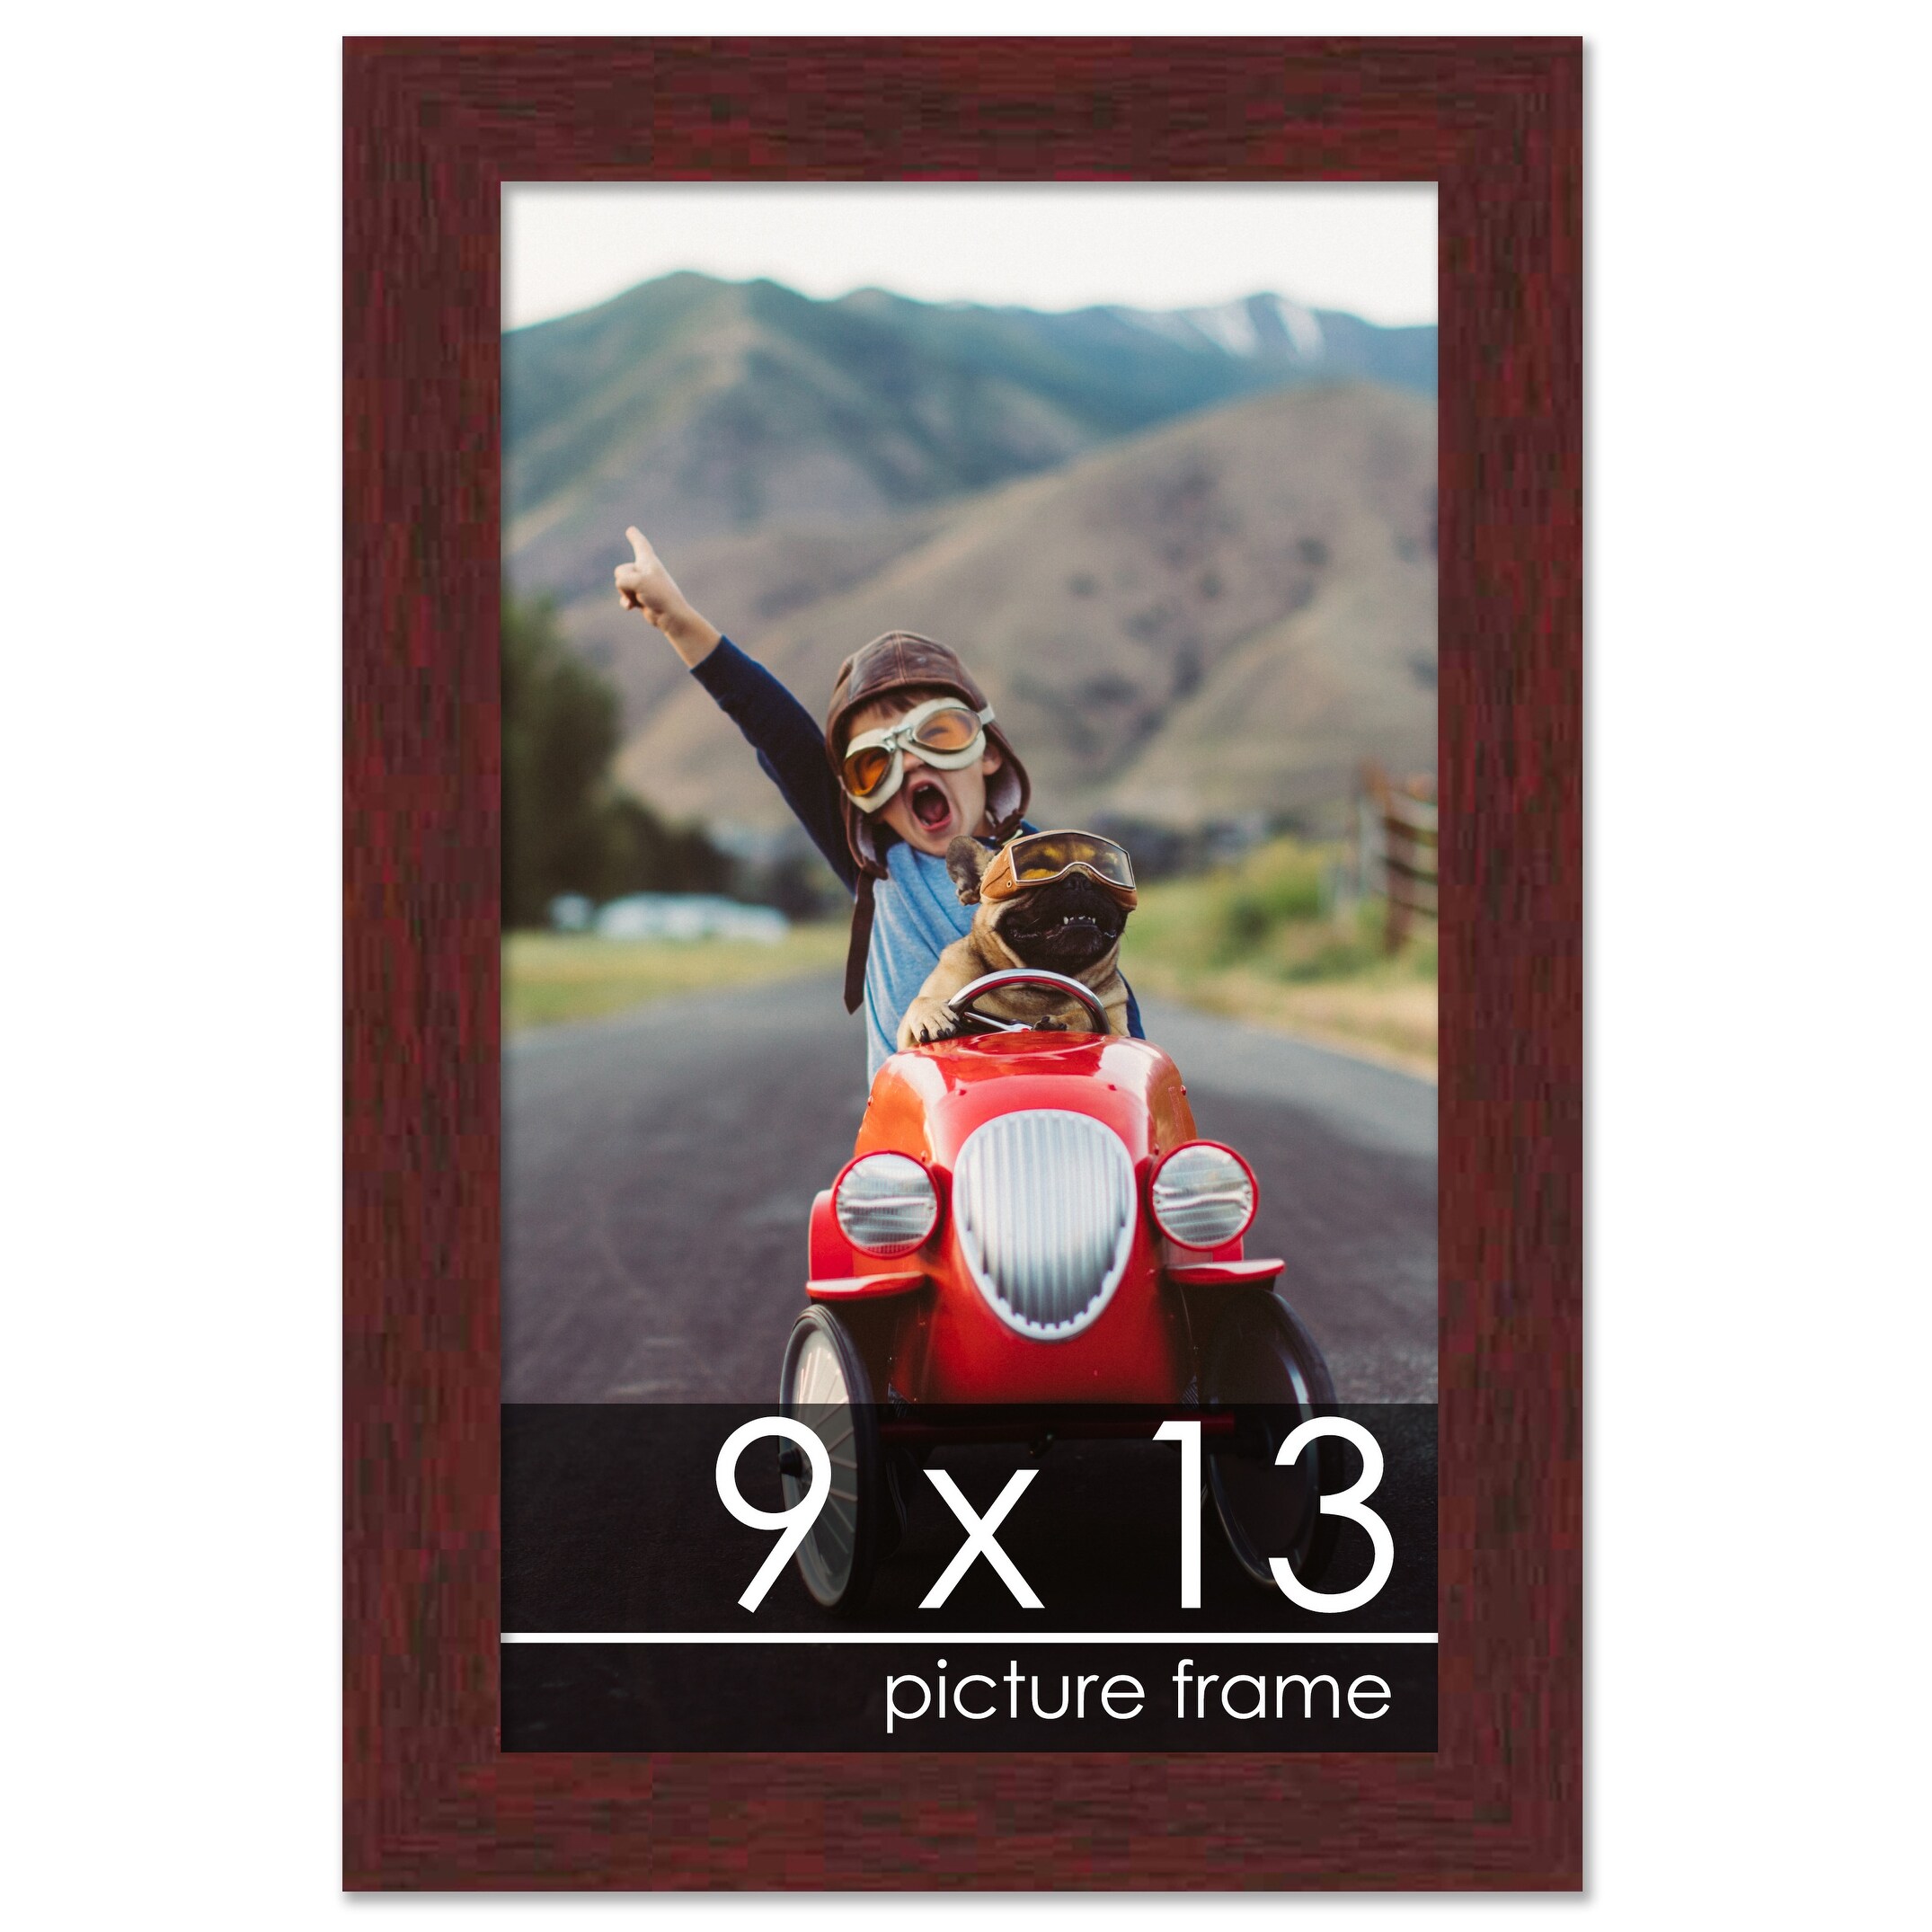 https://ak1.ostkcdn.com/images/products/is/images/direct/78df3d28beece1f028c74cdd77a1d642d70e221a/9x13-Traditional-Walnut-Complete-Wood-Picture-Frame-with-UV-Acrylic%2C-Foam-Board-Backing%2C-%26-Hardware.jpg